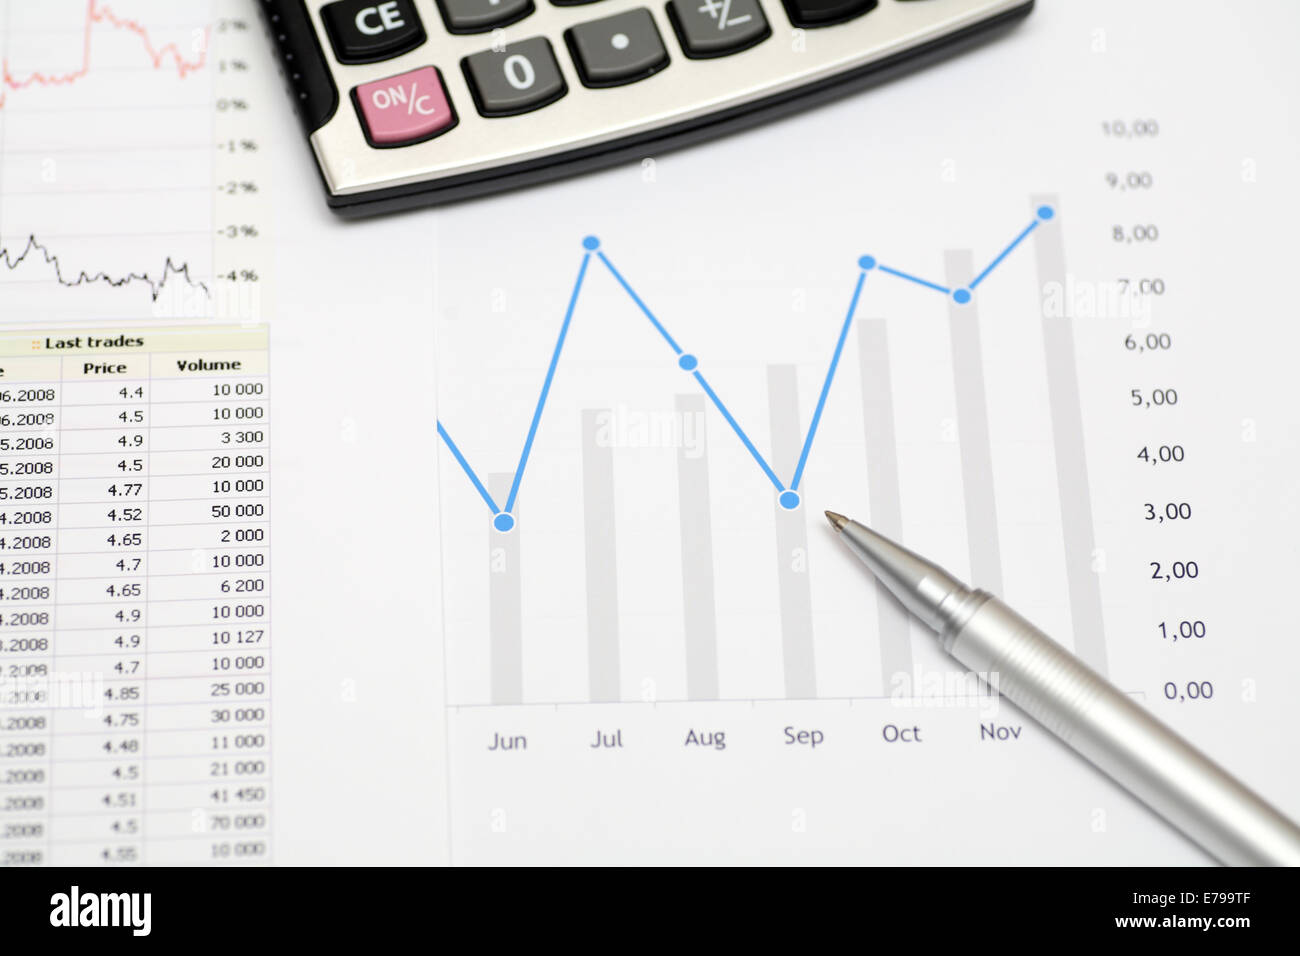 Financial data. Calculator, pen, and financial statements. Close-up. Stock Photo